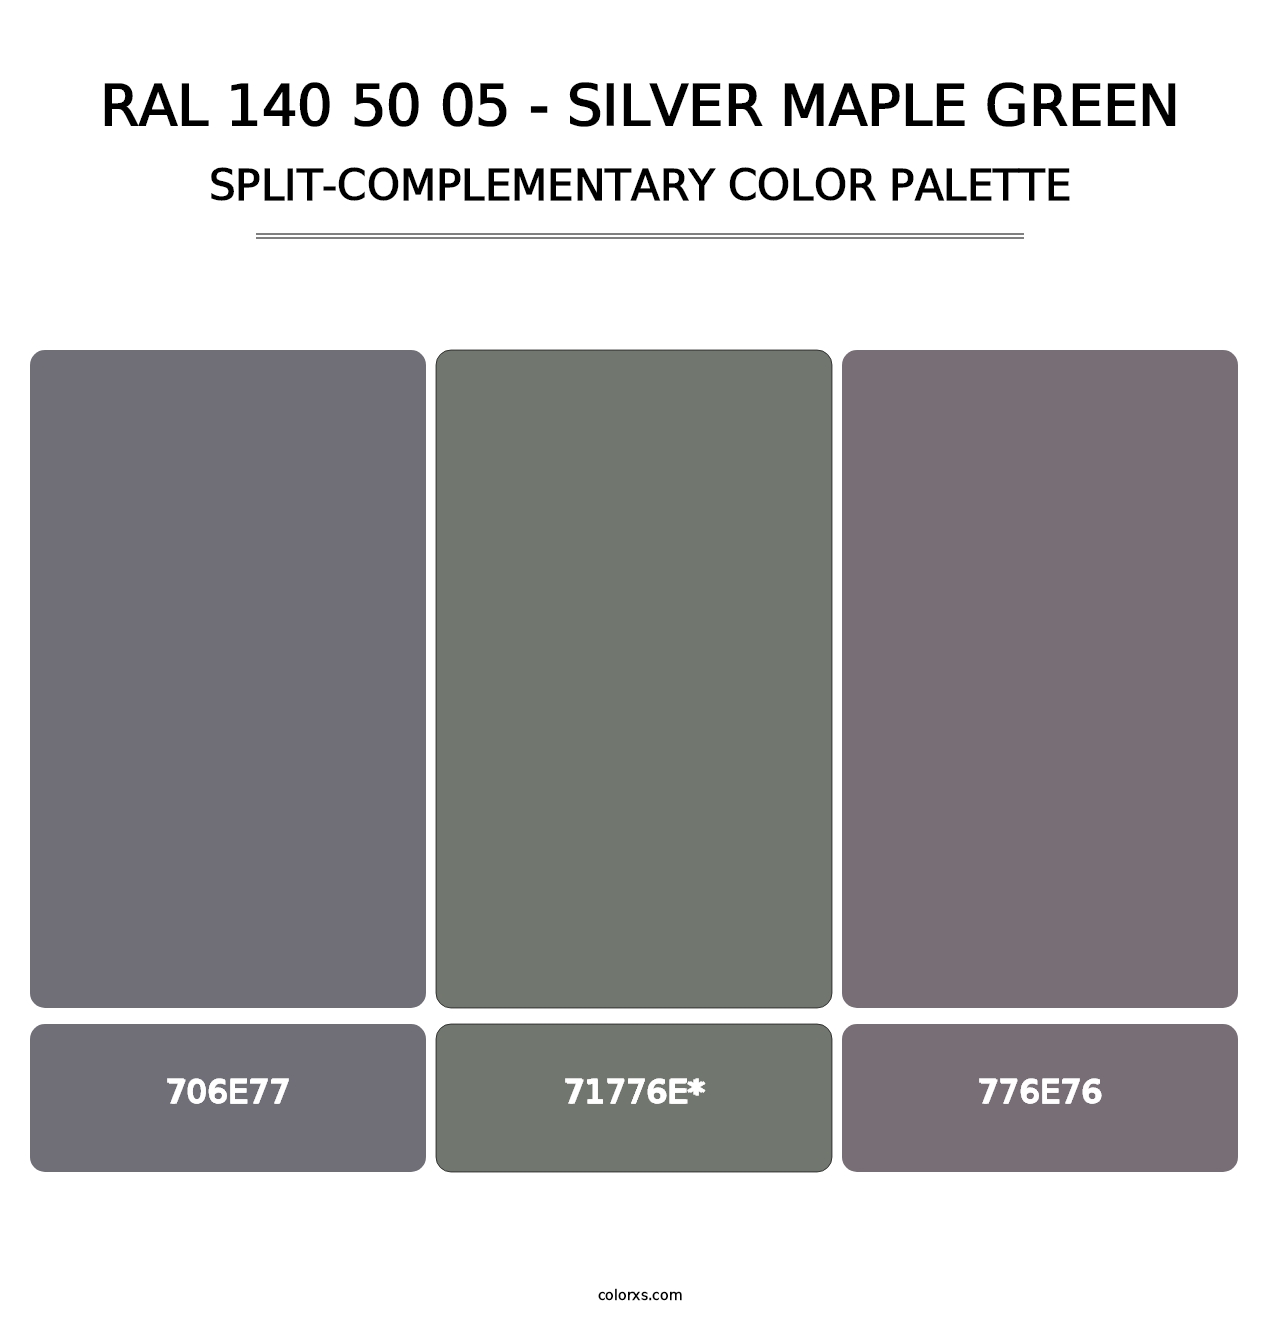 RAL 140 50 05 - Silver Maple Green - Split-Complementary Color Palette